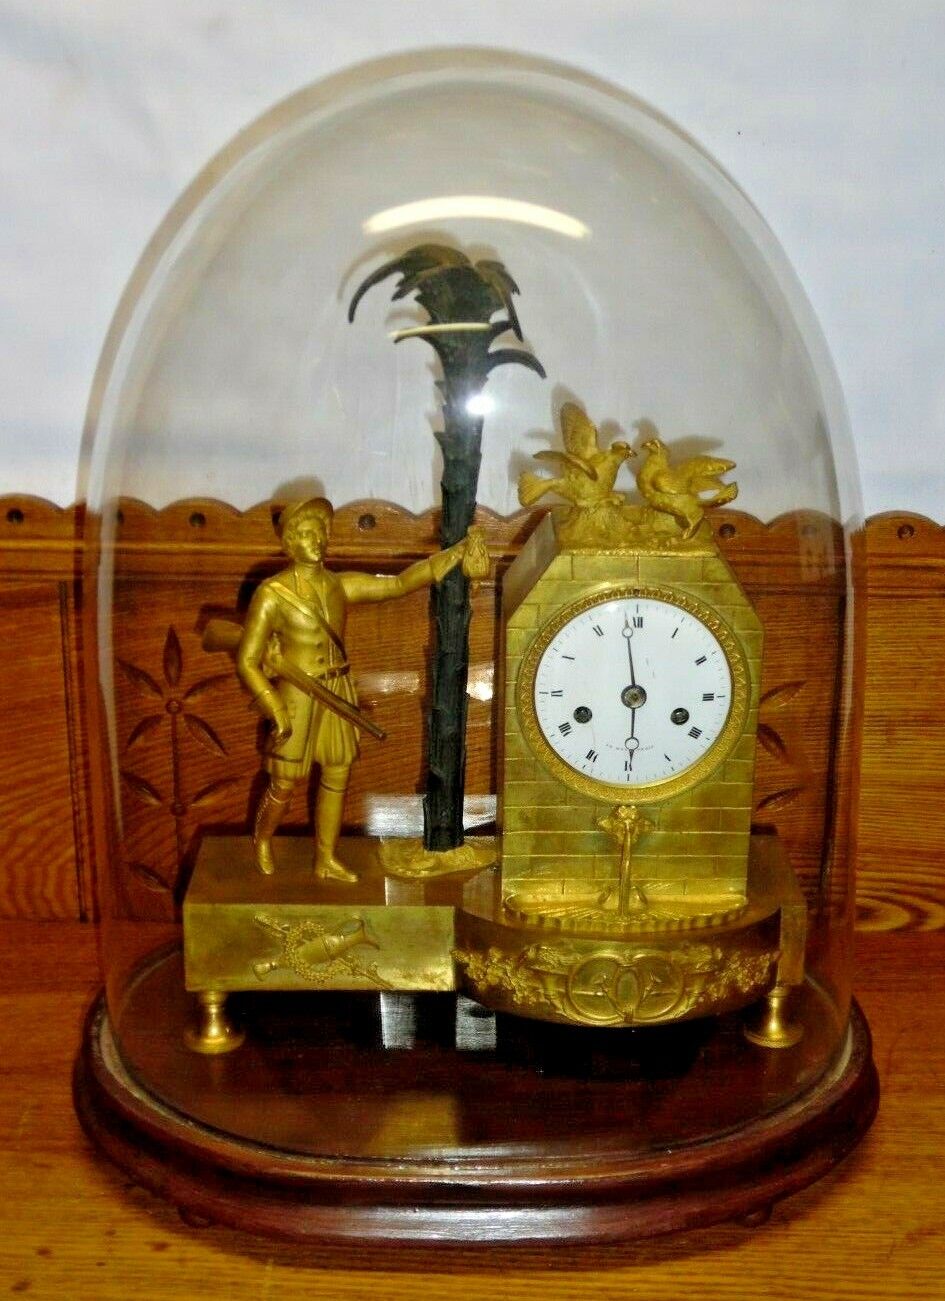 Antique Le Roy A Paris Bronze Hunting Mantel Clock In Glass Dome -Needs TLC